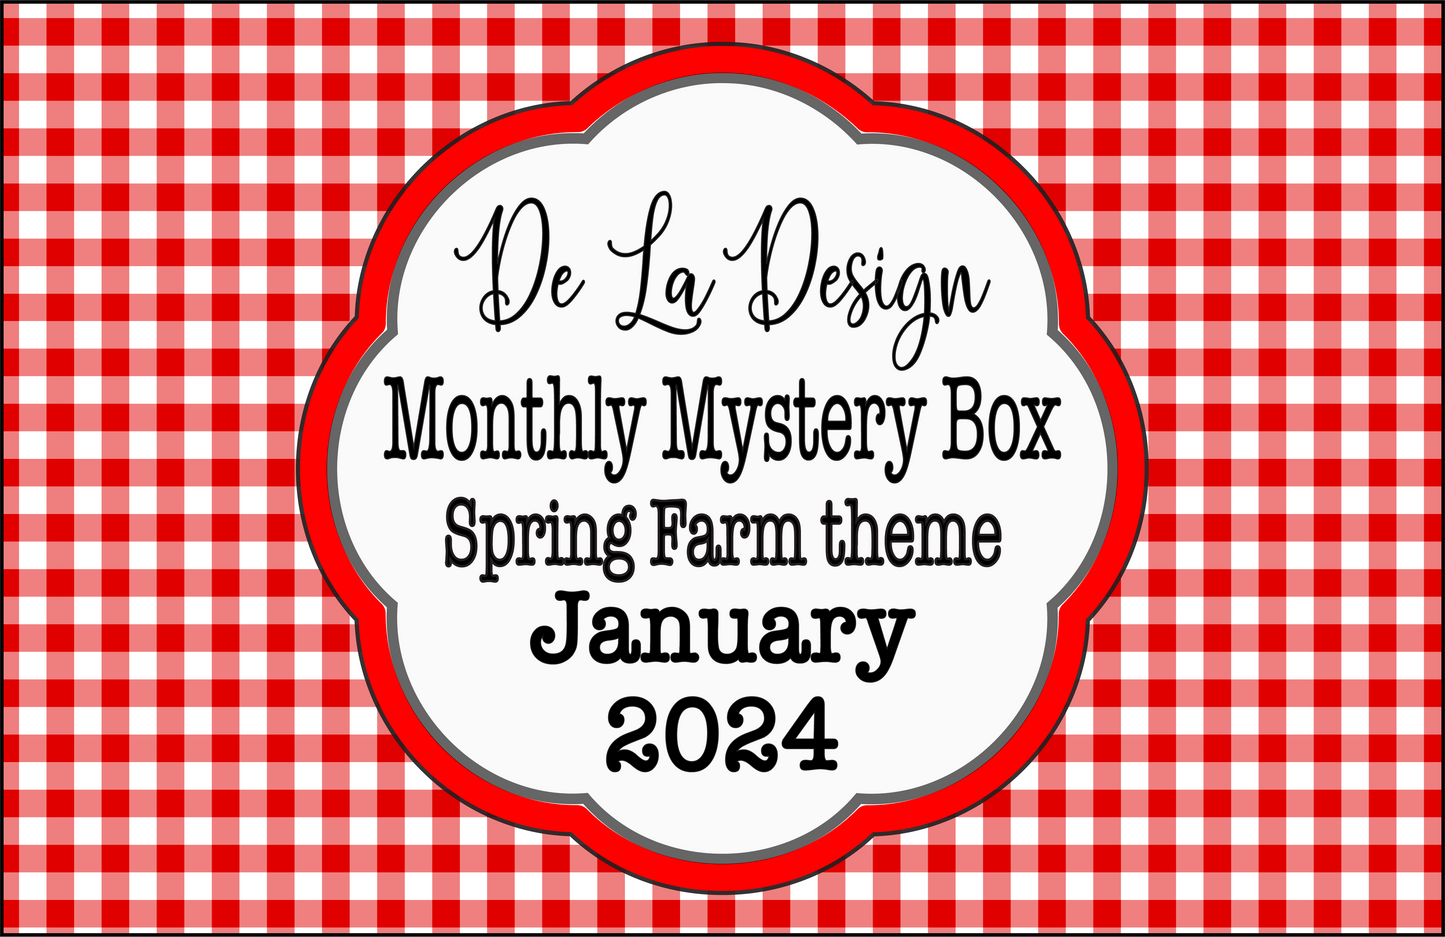 Monthly Mystery Box - January 2024 - Spring Farm themed